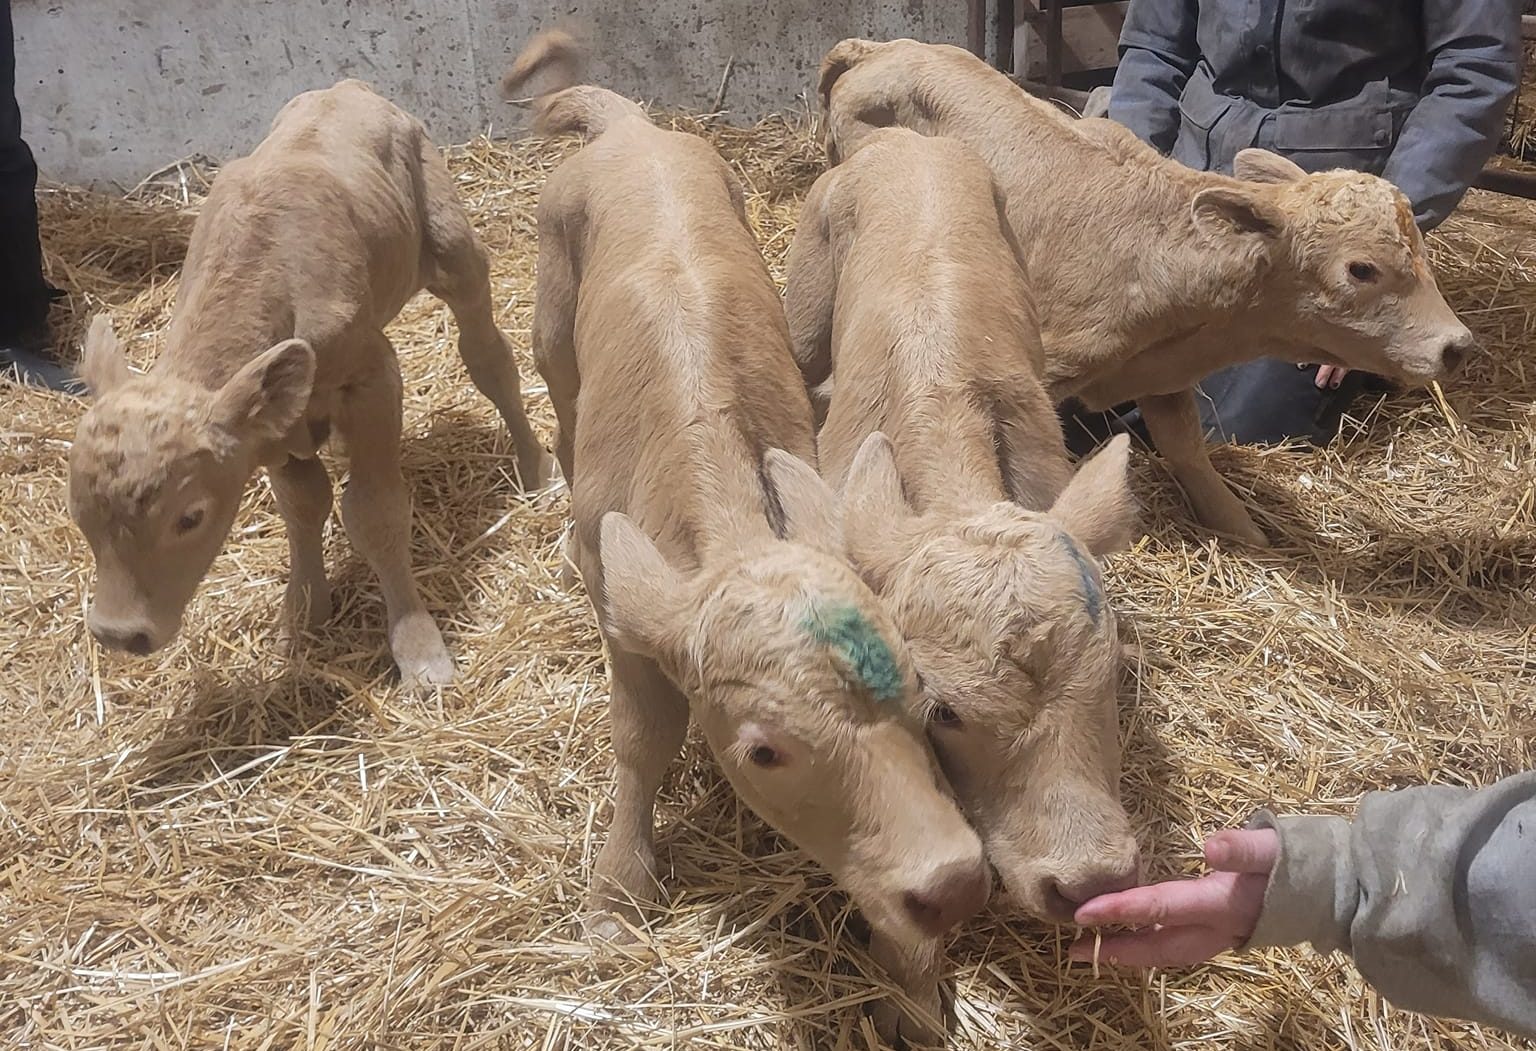 Sask. family’s cow gives birth to rare set of quadruplets